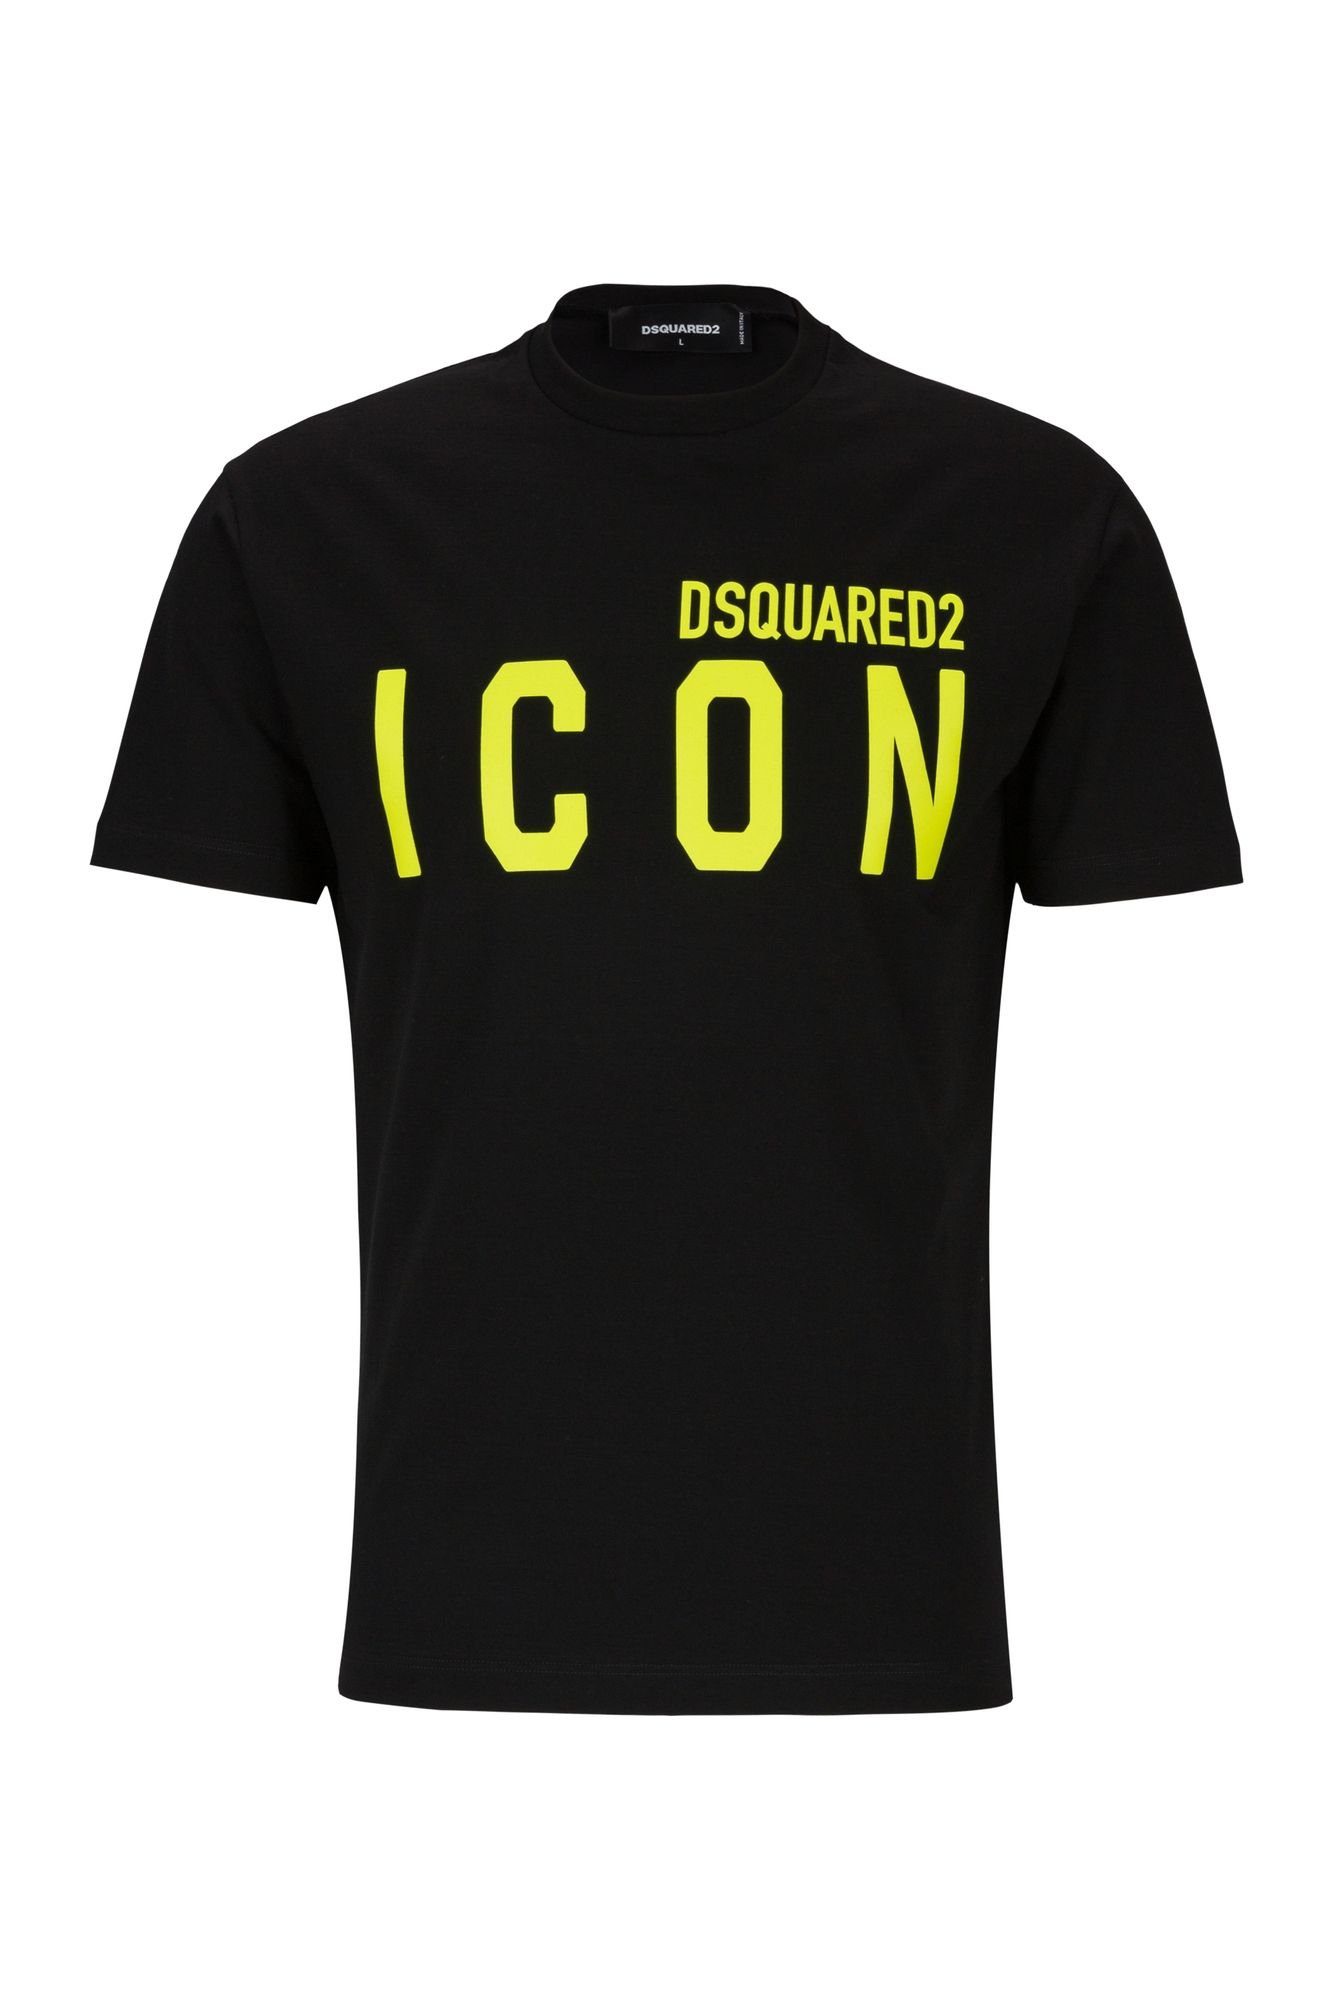 Green T-Shirt ICON Dsquared2 Neon Dsquared